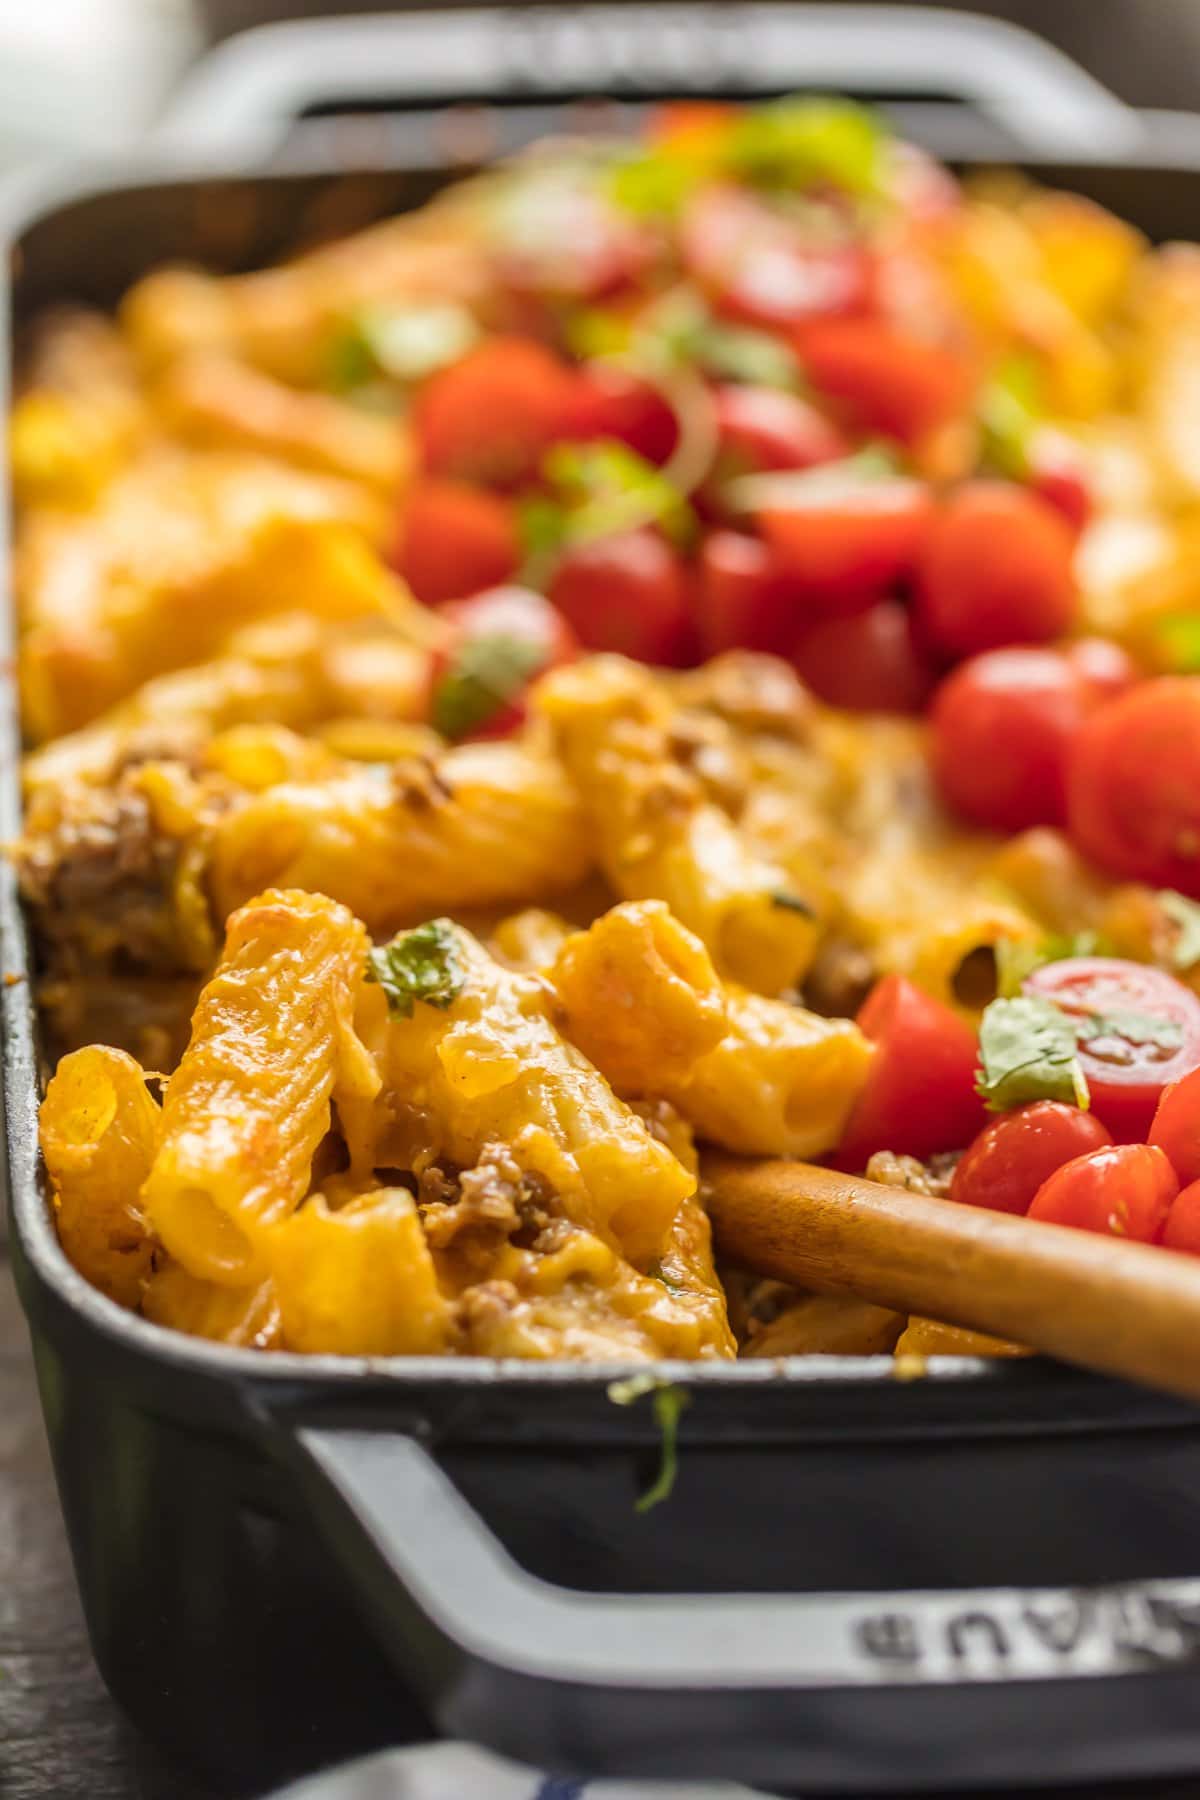 Baked Mexican Macaroni and Cheese